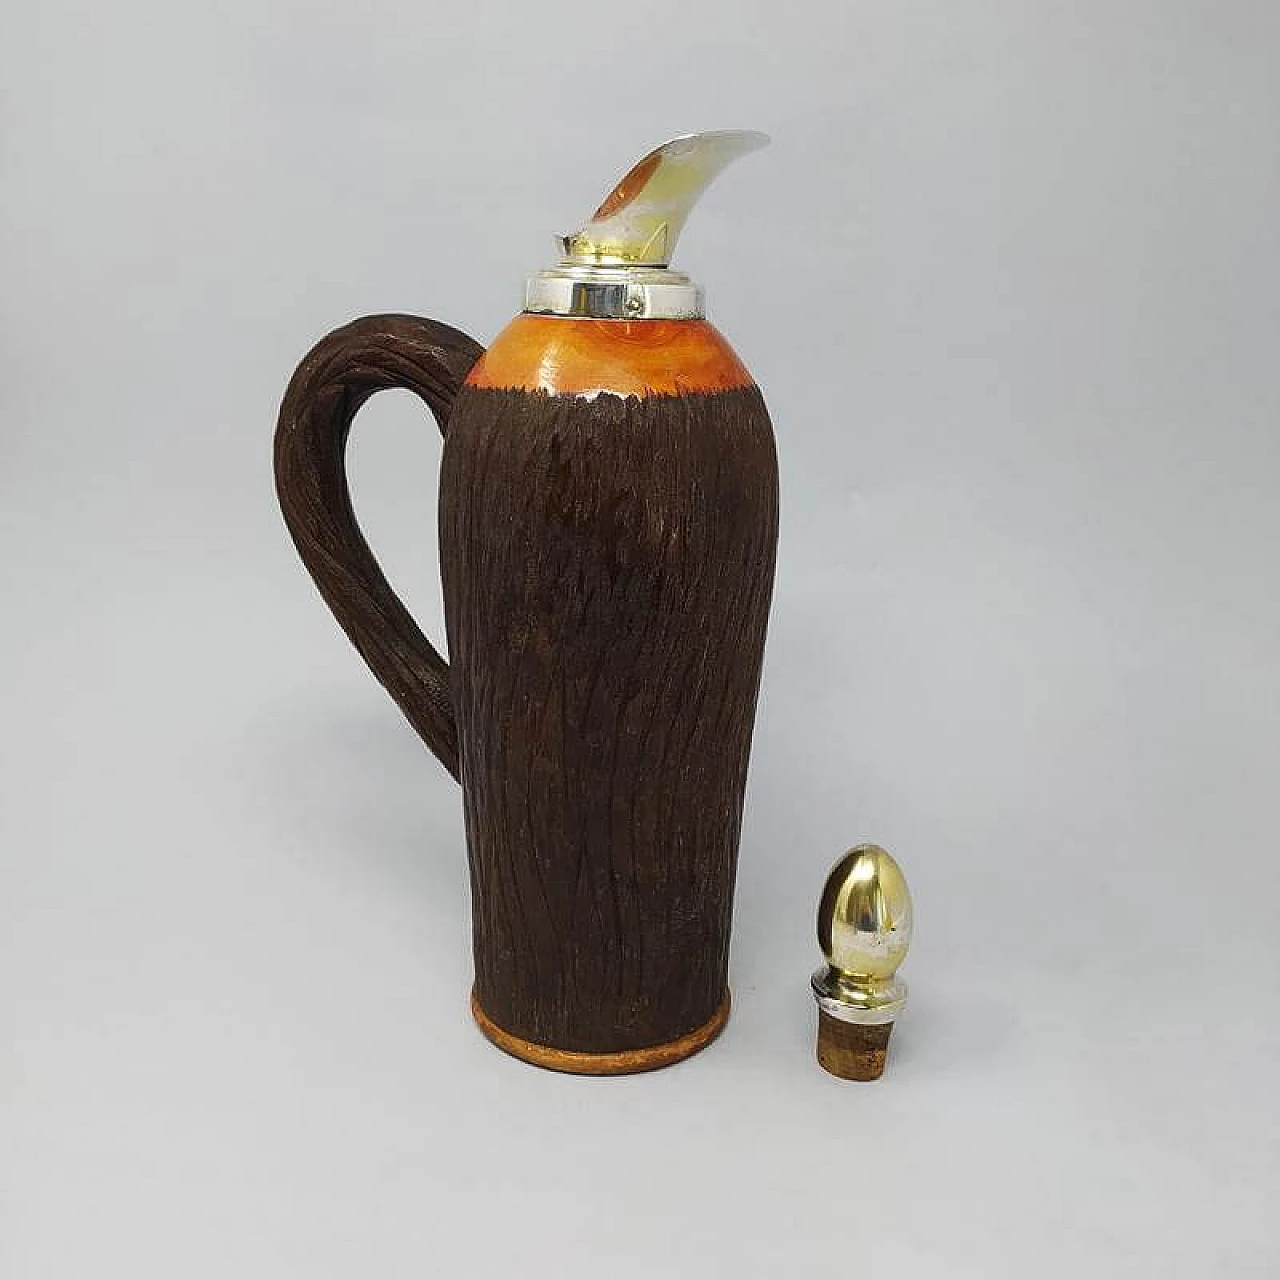 1950s Stunning Aldo Tura Pitcher in Brass and Wood, Made in Italy 1183876